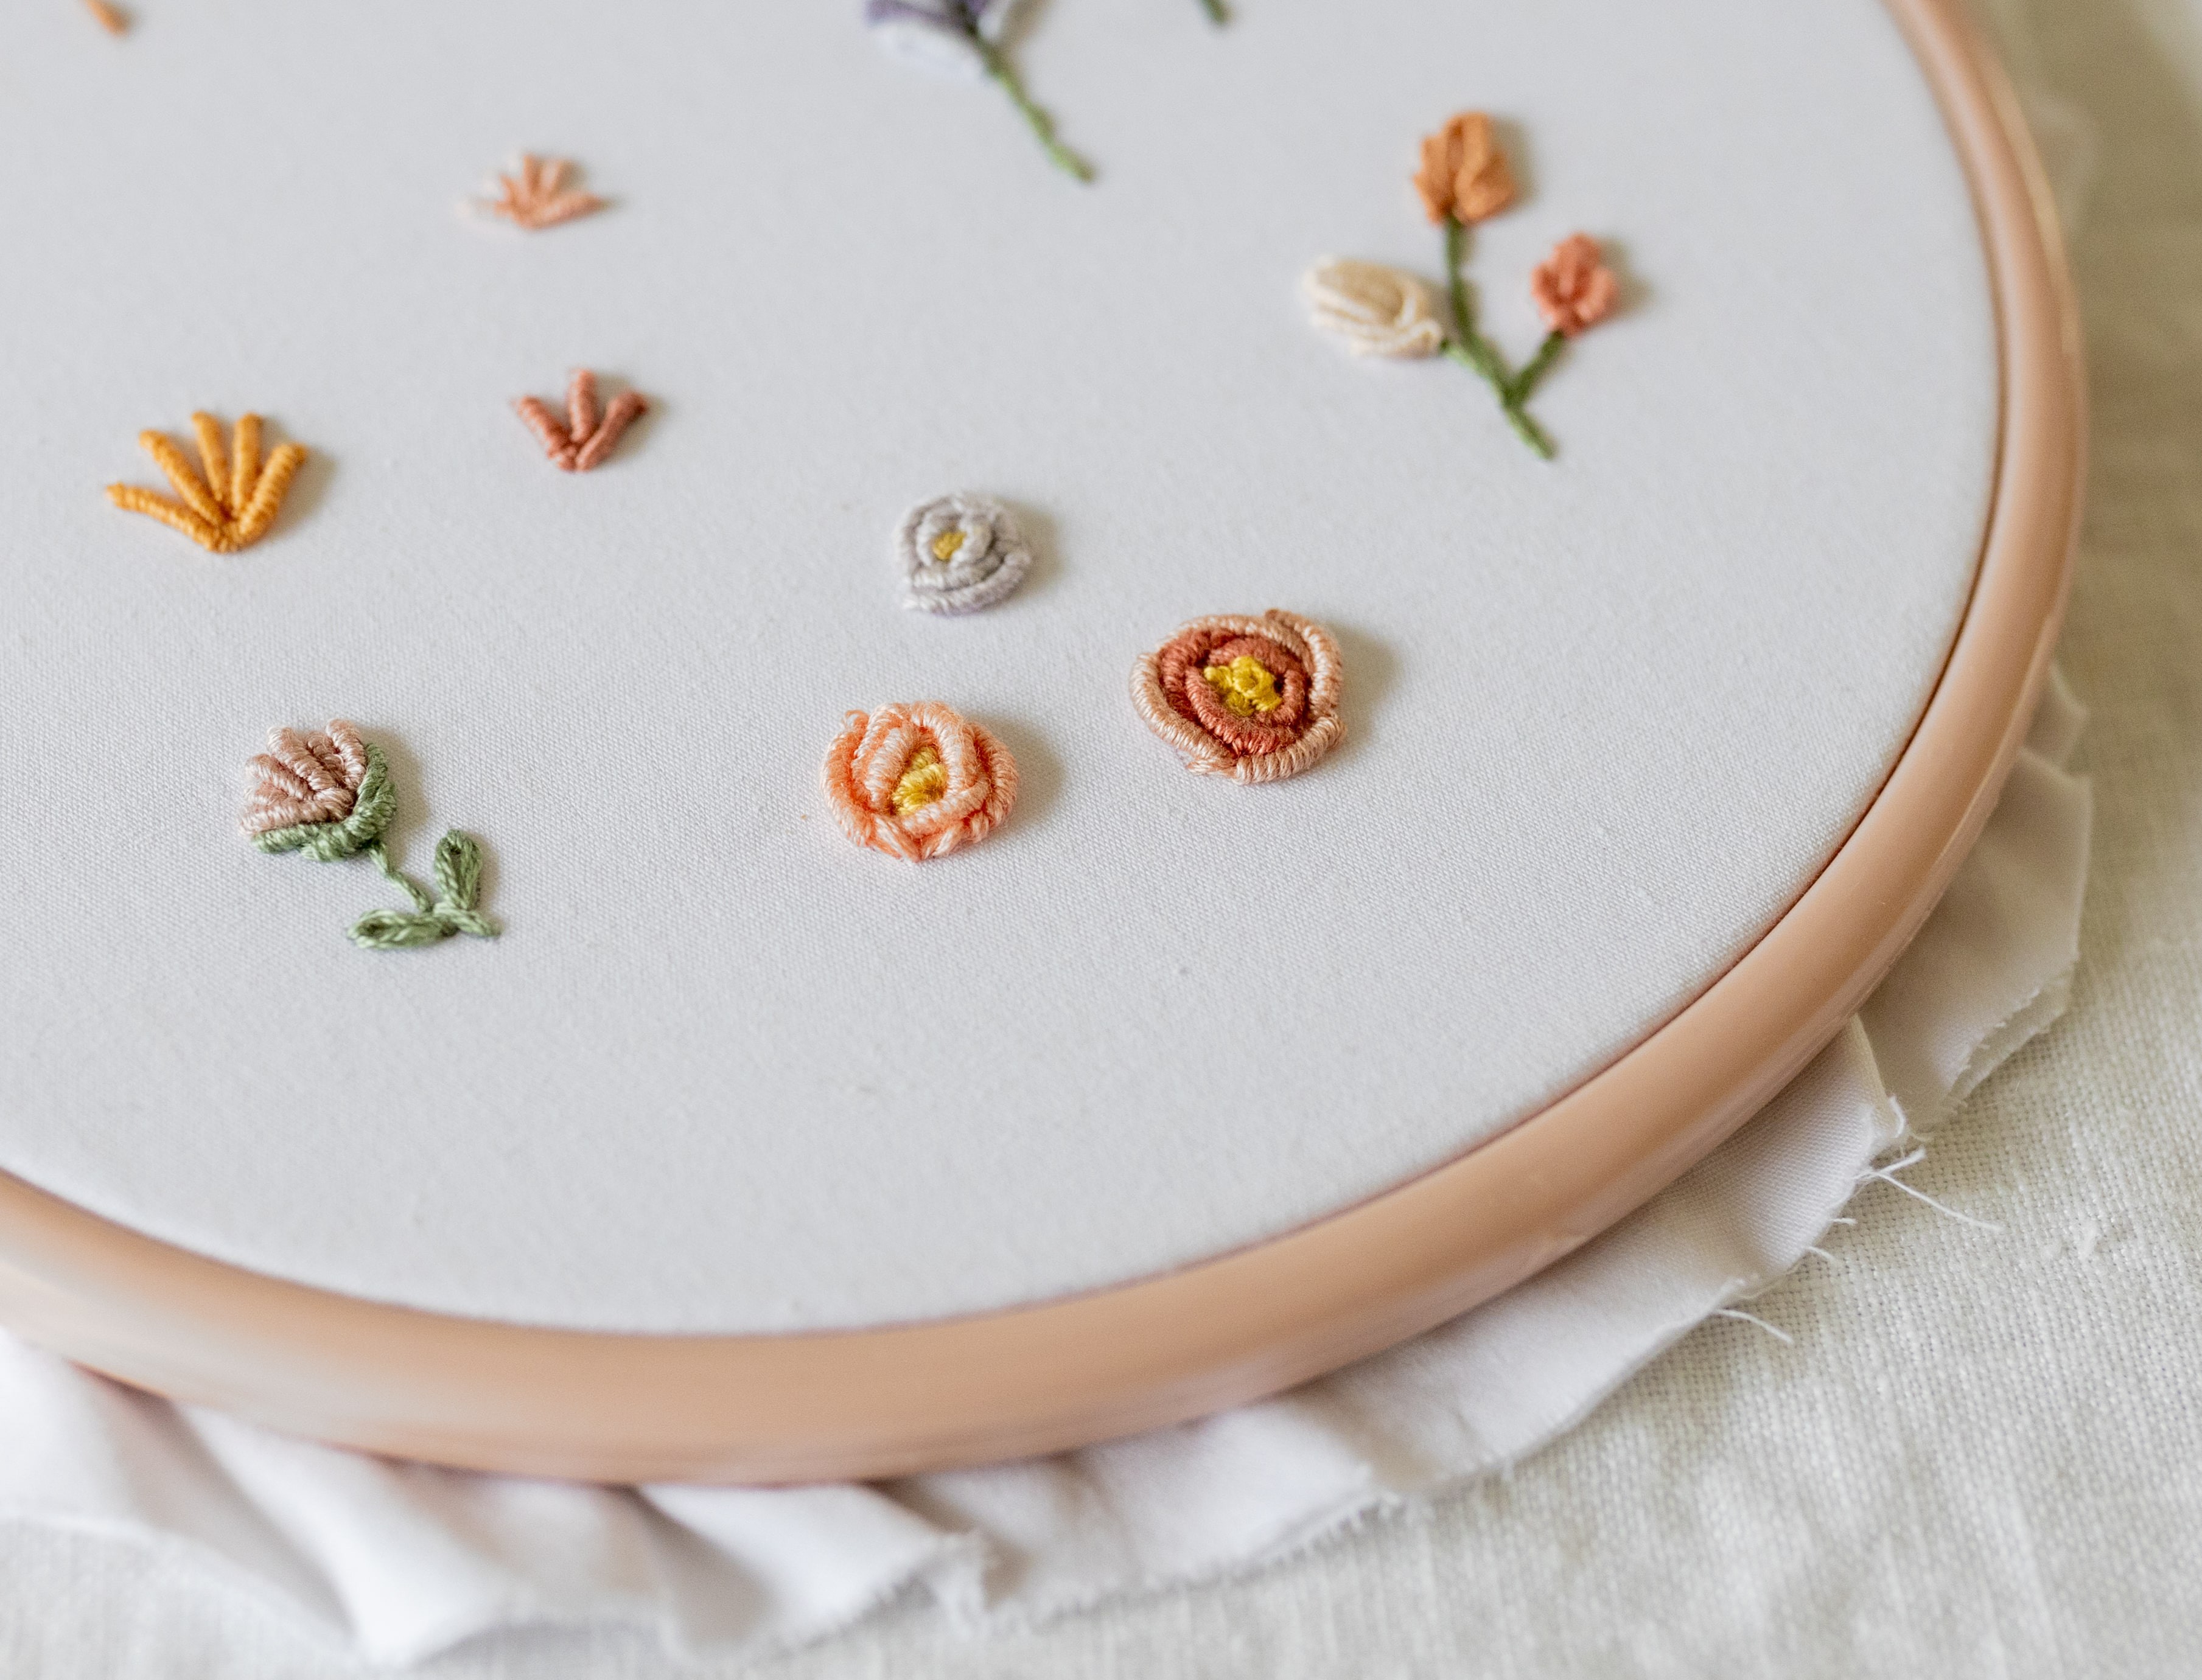 Various flowers made with Bullion Knots are stitched on an embroidery hoop.